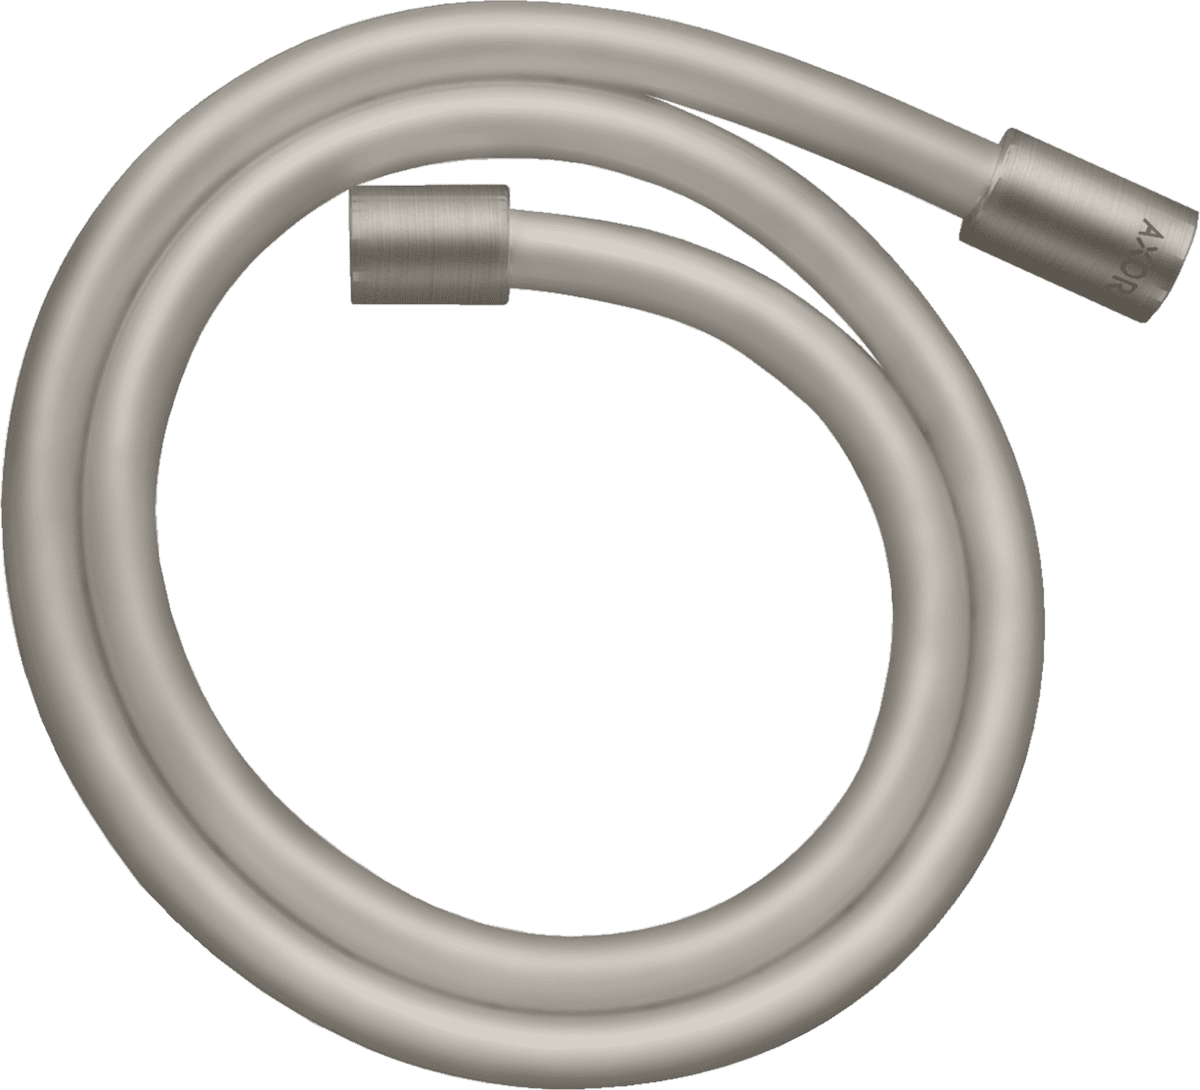 HANSGROHE AXOR Starck Metal effect shower hose 2.00 m with cylindrical nuts #28284800 - Stainless Steel Optic resmi